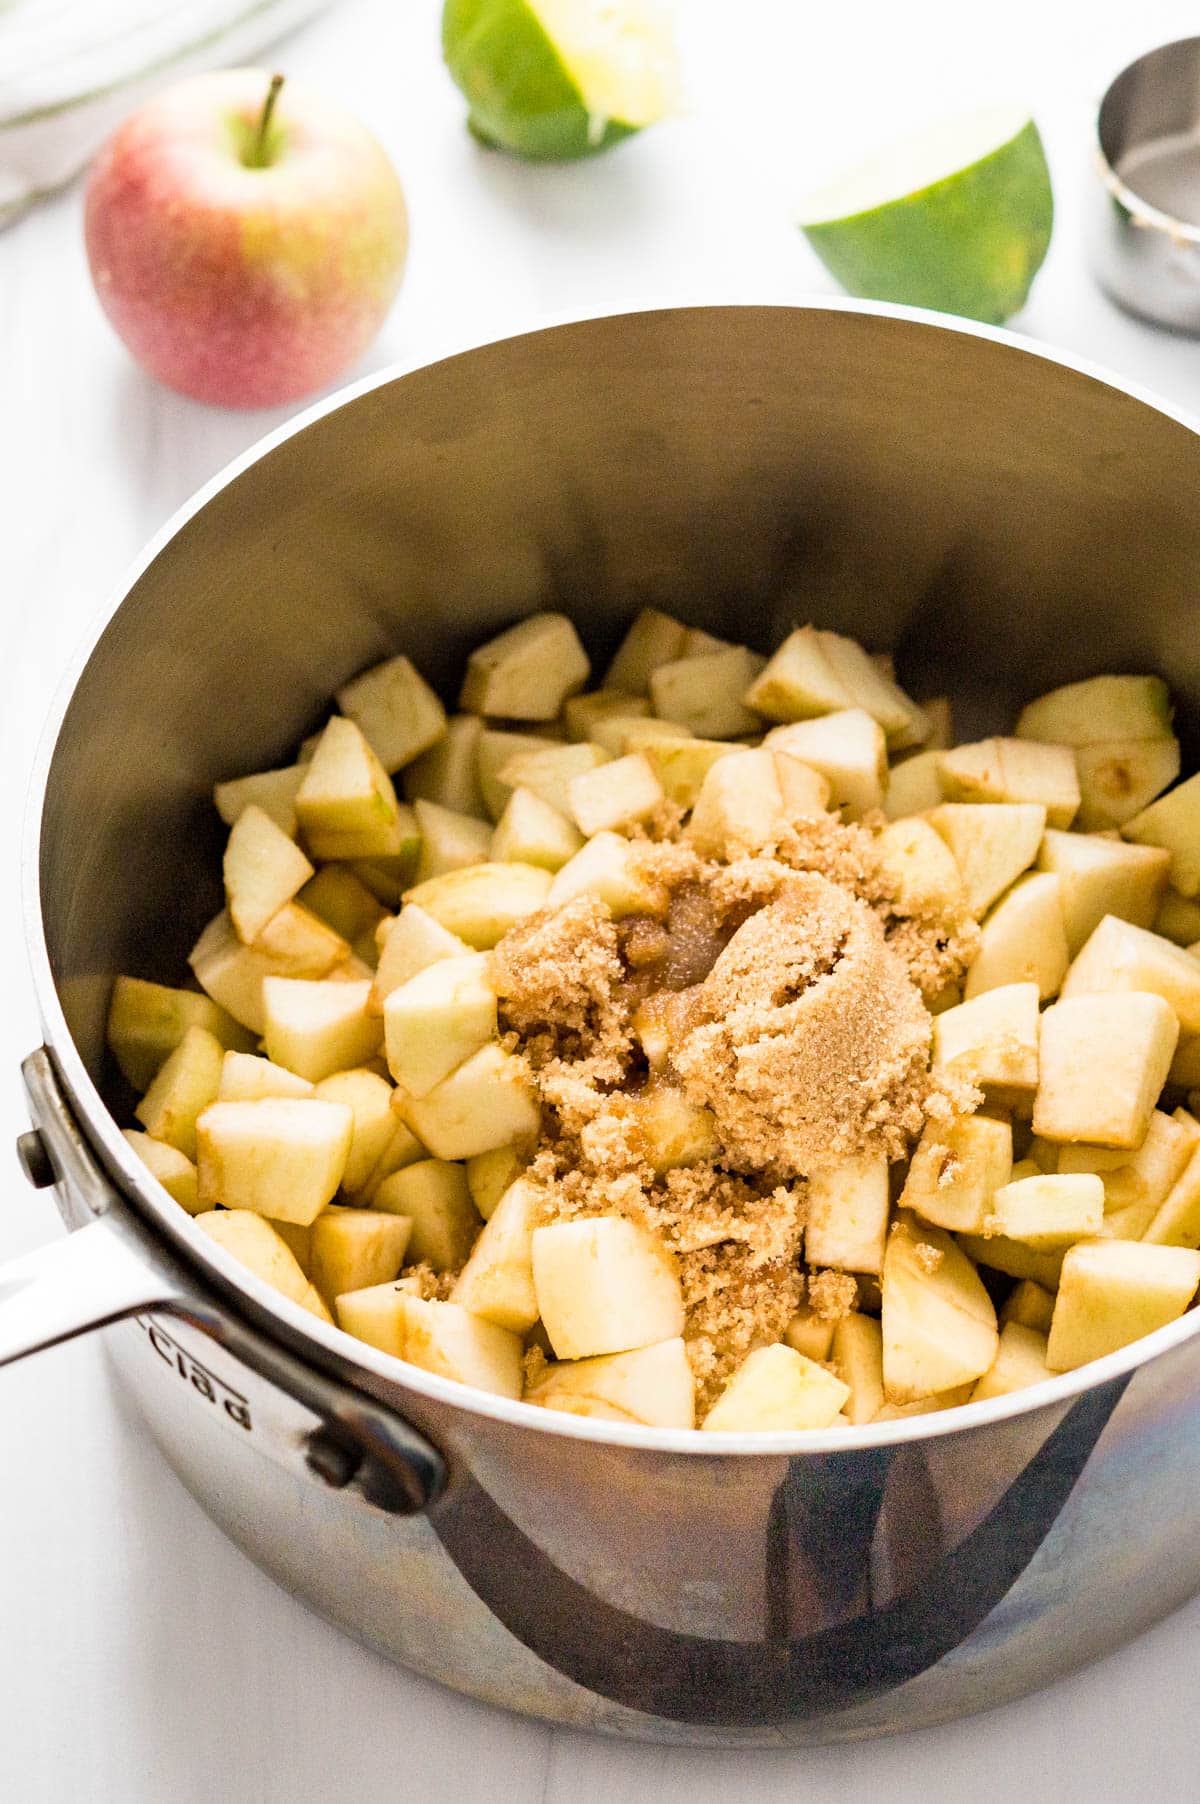 Combining apples with brown sugar and lime juice.